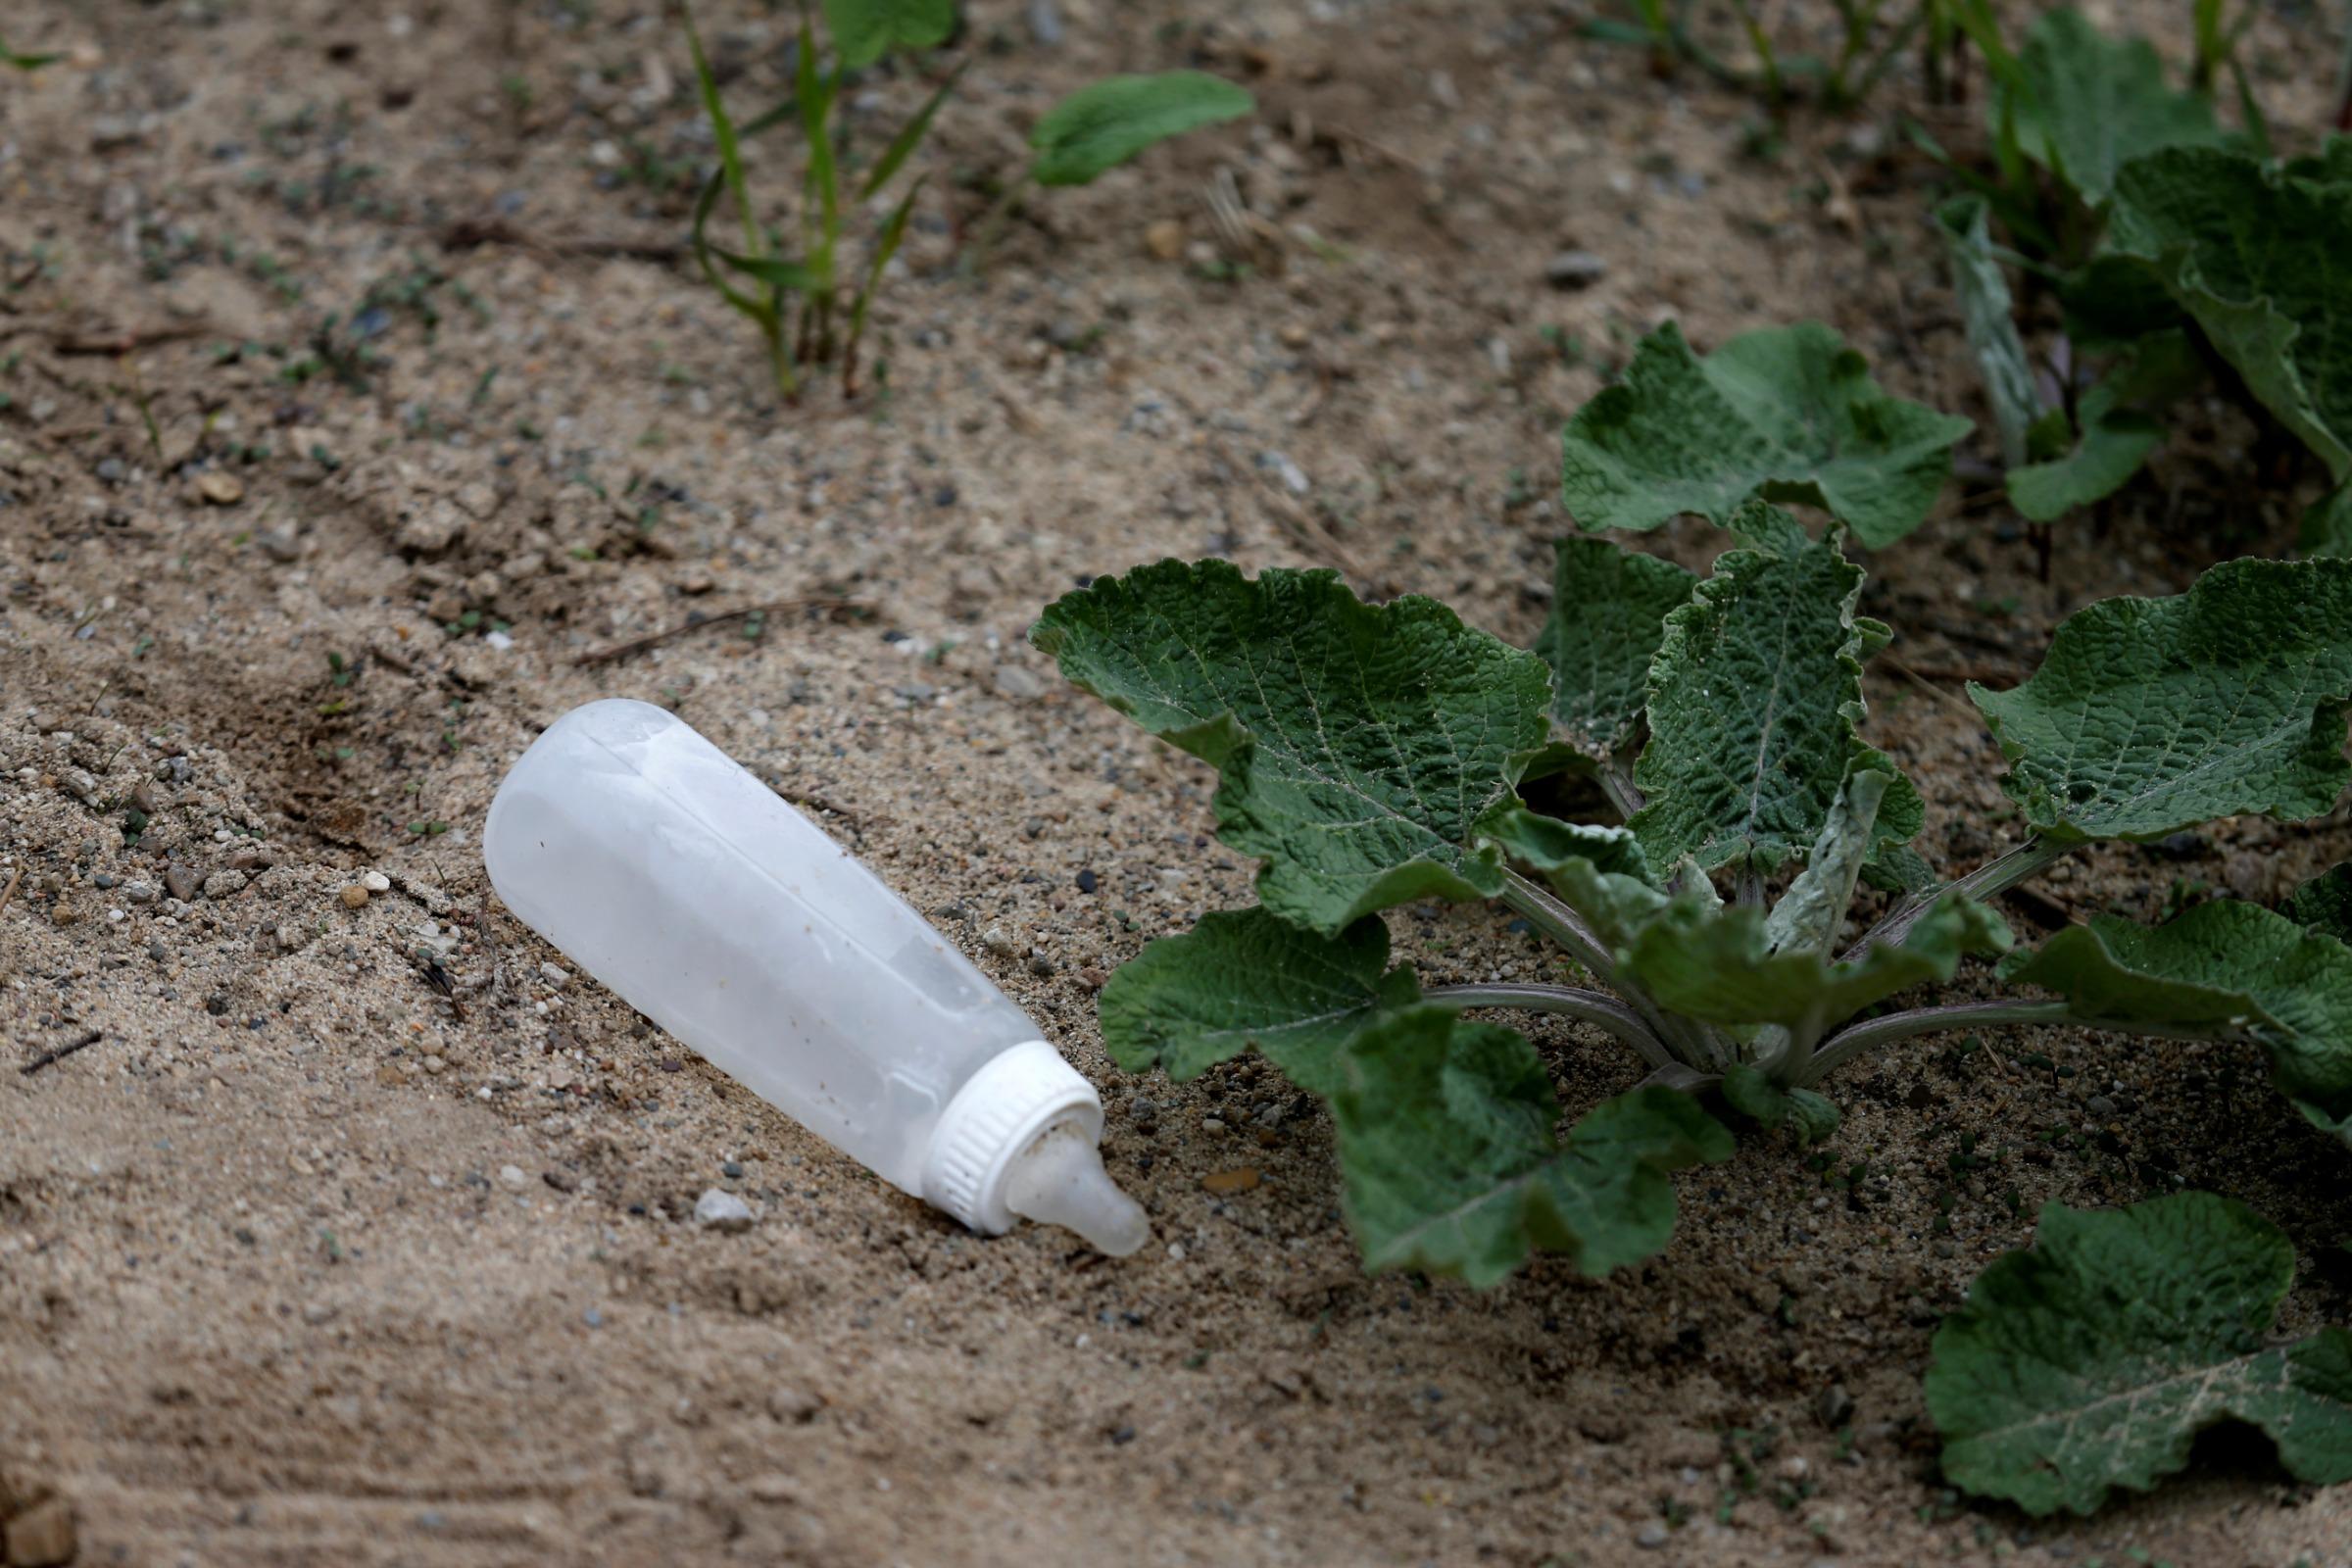 An empty baby bottle lies on the ground in sandy dirt next to leafy green plants near the U.S.-Canada border on Roxham Road from Champlain, New York, U.S., on April 24, 2017. 